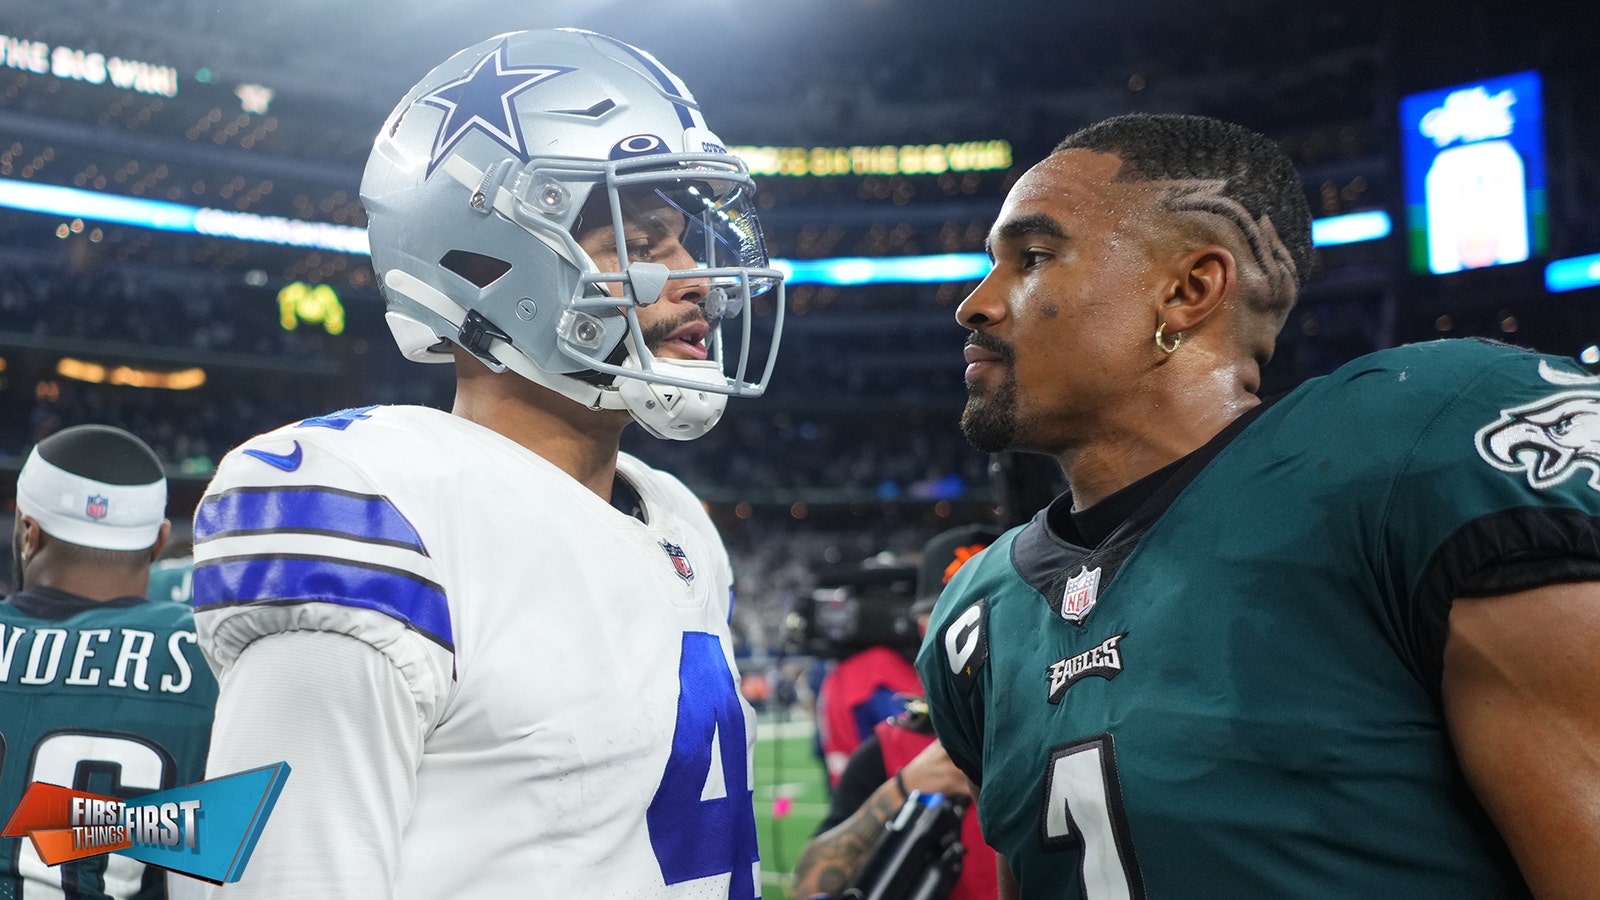 Eagles host Cowboys in Week 9: which QB do you trust more?